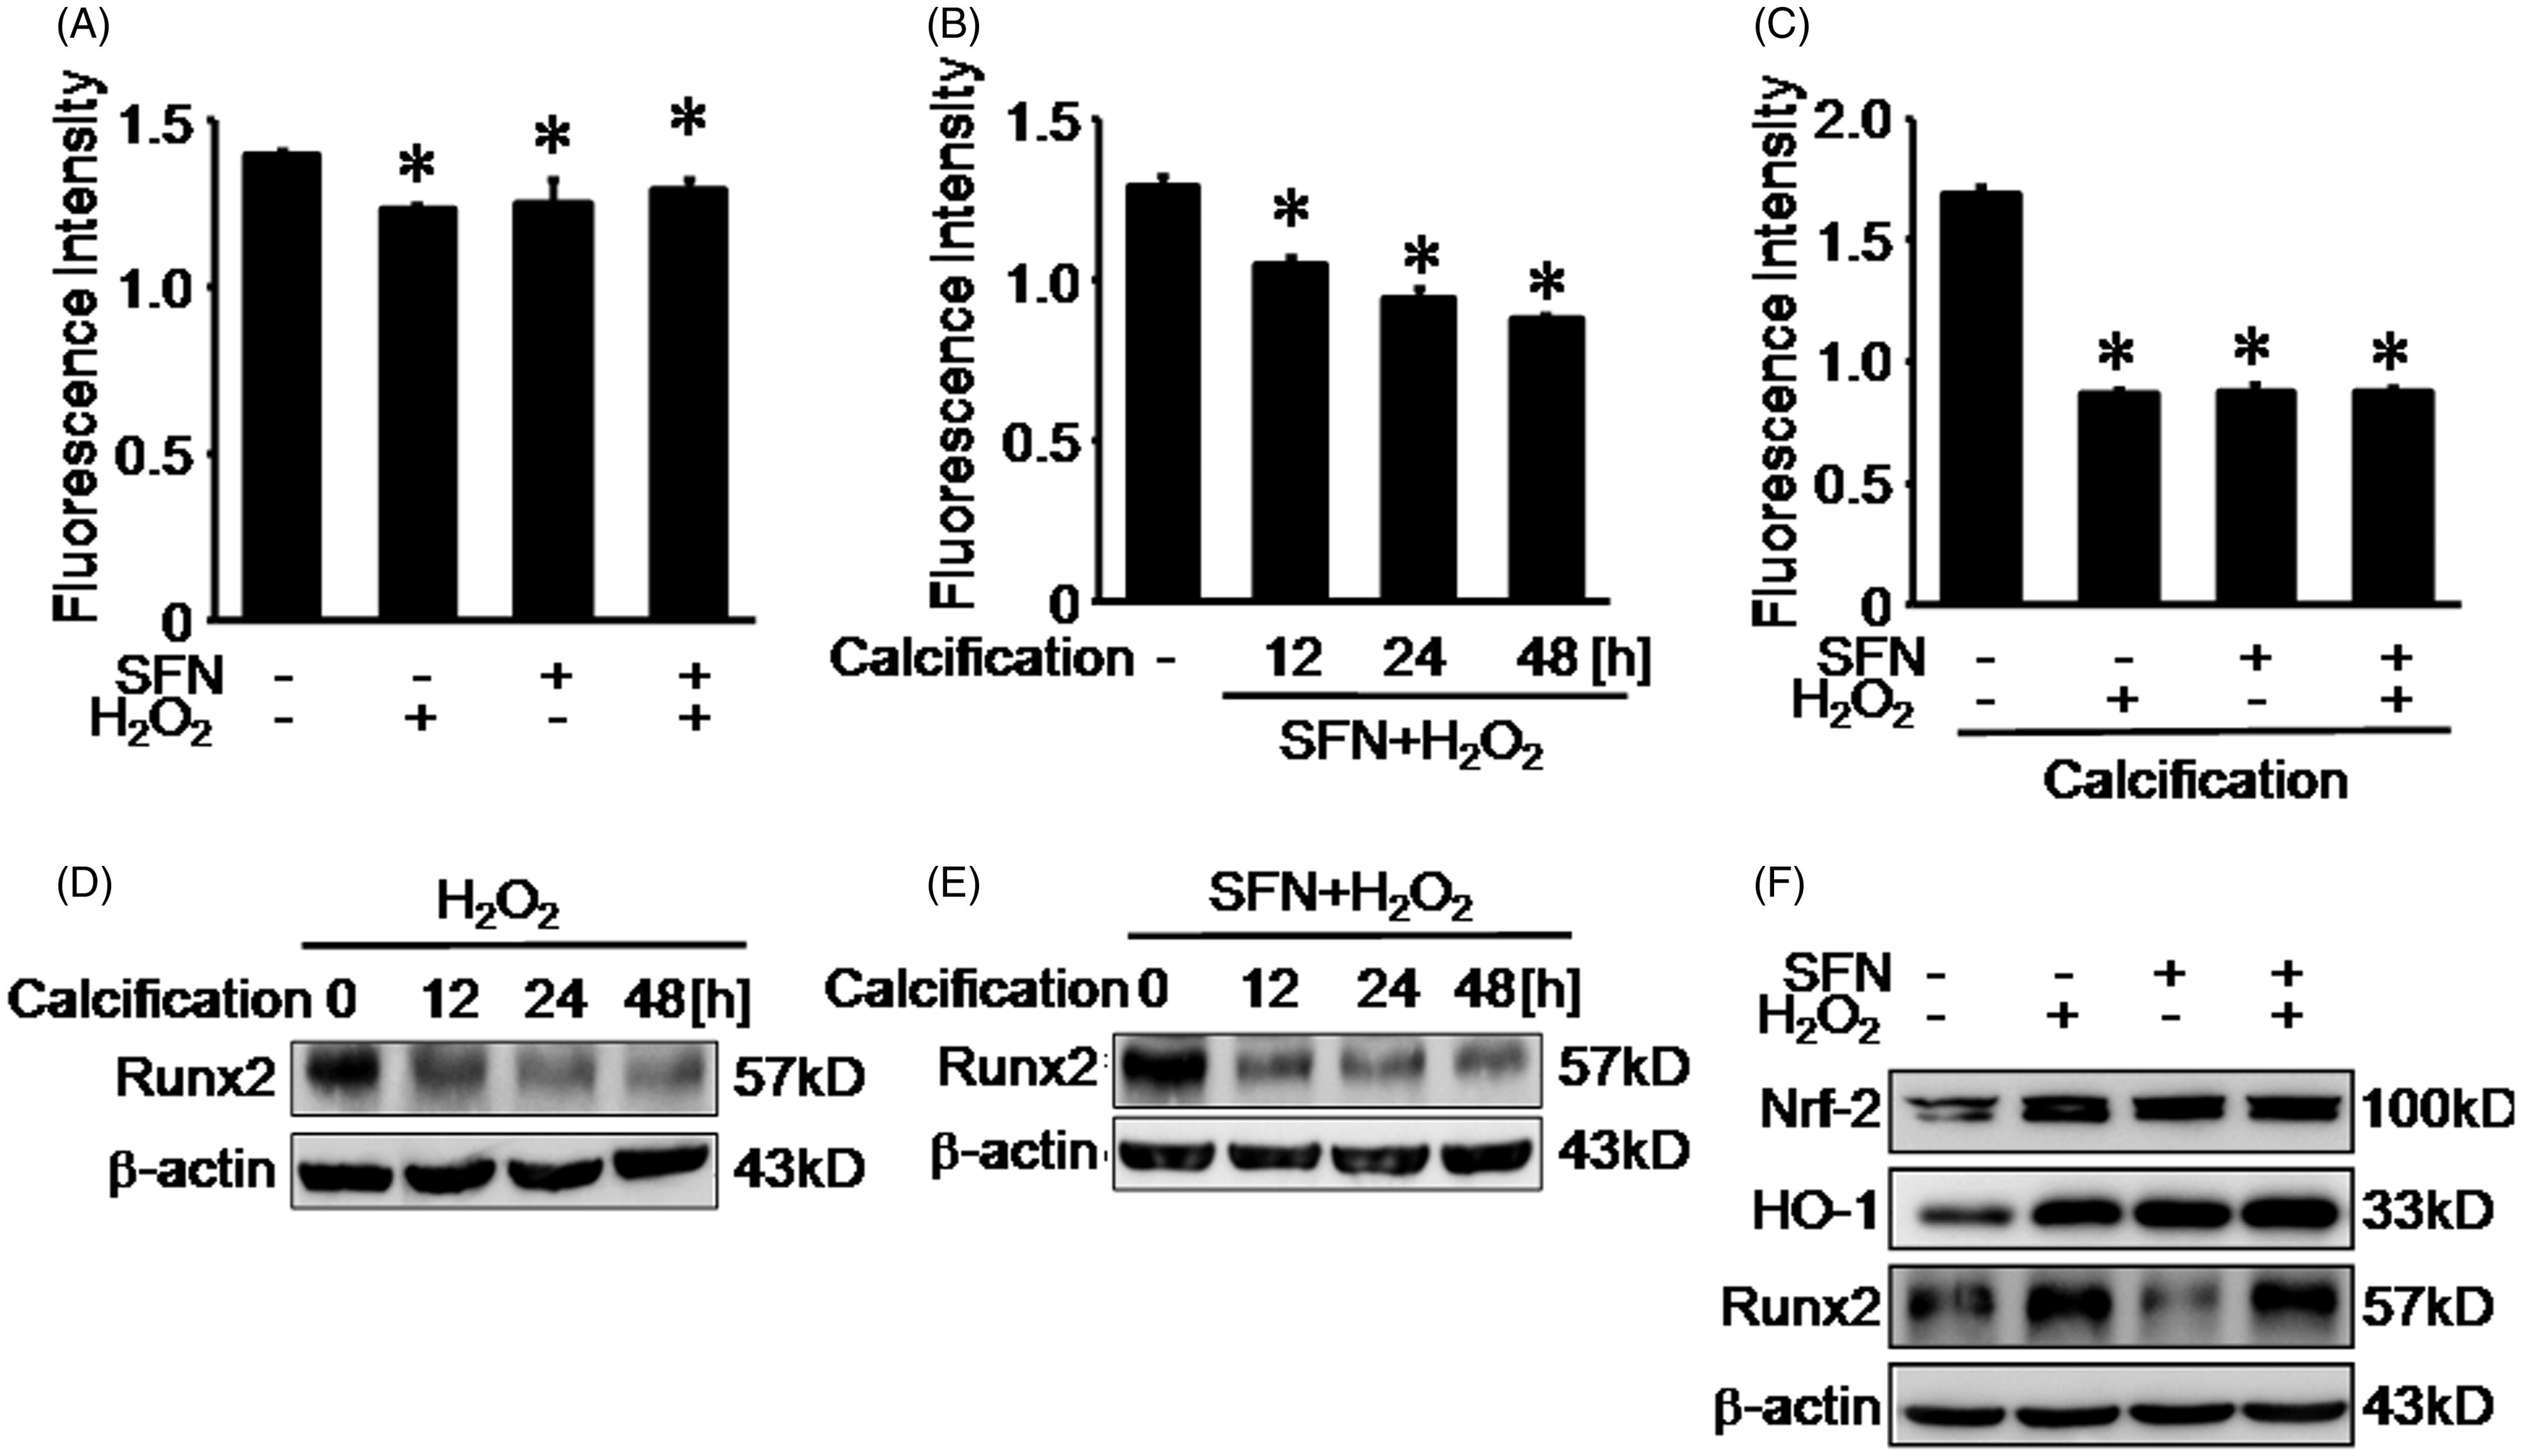 Figure 5. Hydrogen peroxide and SFN reduced ROS production upon calcification. (A) ROS production was measured by reactive oxygen species assay following 5 μM SFN treatment and 0.01 mM hydrogen peroxide treatment. (B) ROS production was measured by reactive oxygen species assay following both 5 μM SFN and 0.01 mM hydrogen peroxide treatment upon calcification from 12 h to 48 h. (C) ROS production was measured by reactive oxygen species assay following 5 μM SFN treatment and 0.01 mM hydrogen peroxide treatment upon calcification from 48 h. (D) Runx2 expression was detected by Western blotting following 0.01 mM hydrogen peroxide pretreatment and calcification. (E) Runx2 expression was detected by Western blotting following both 5 μM SFN and 0.01 mM hydrogen peroxide treatment upon calcification from 12 h to 48 h. (F) Runx2 expression was detected by Western blotting following 5 μM SFN treatment and 0.01 mM hydrogen peroxide treatment. Data are means ± SD; *p < 0.05 versus normal control.